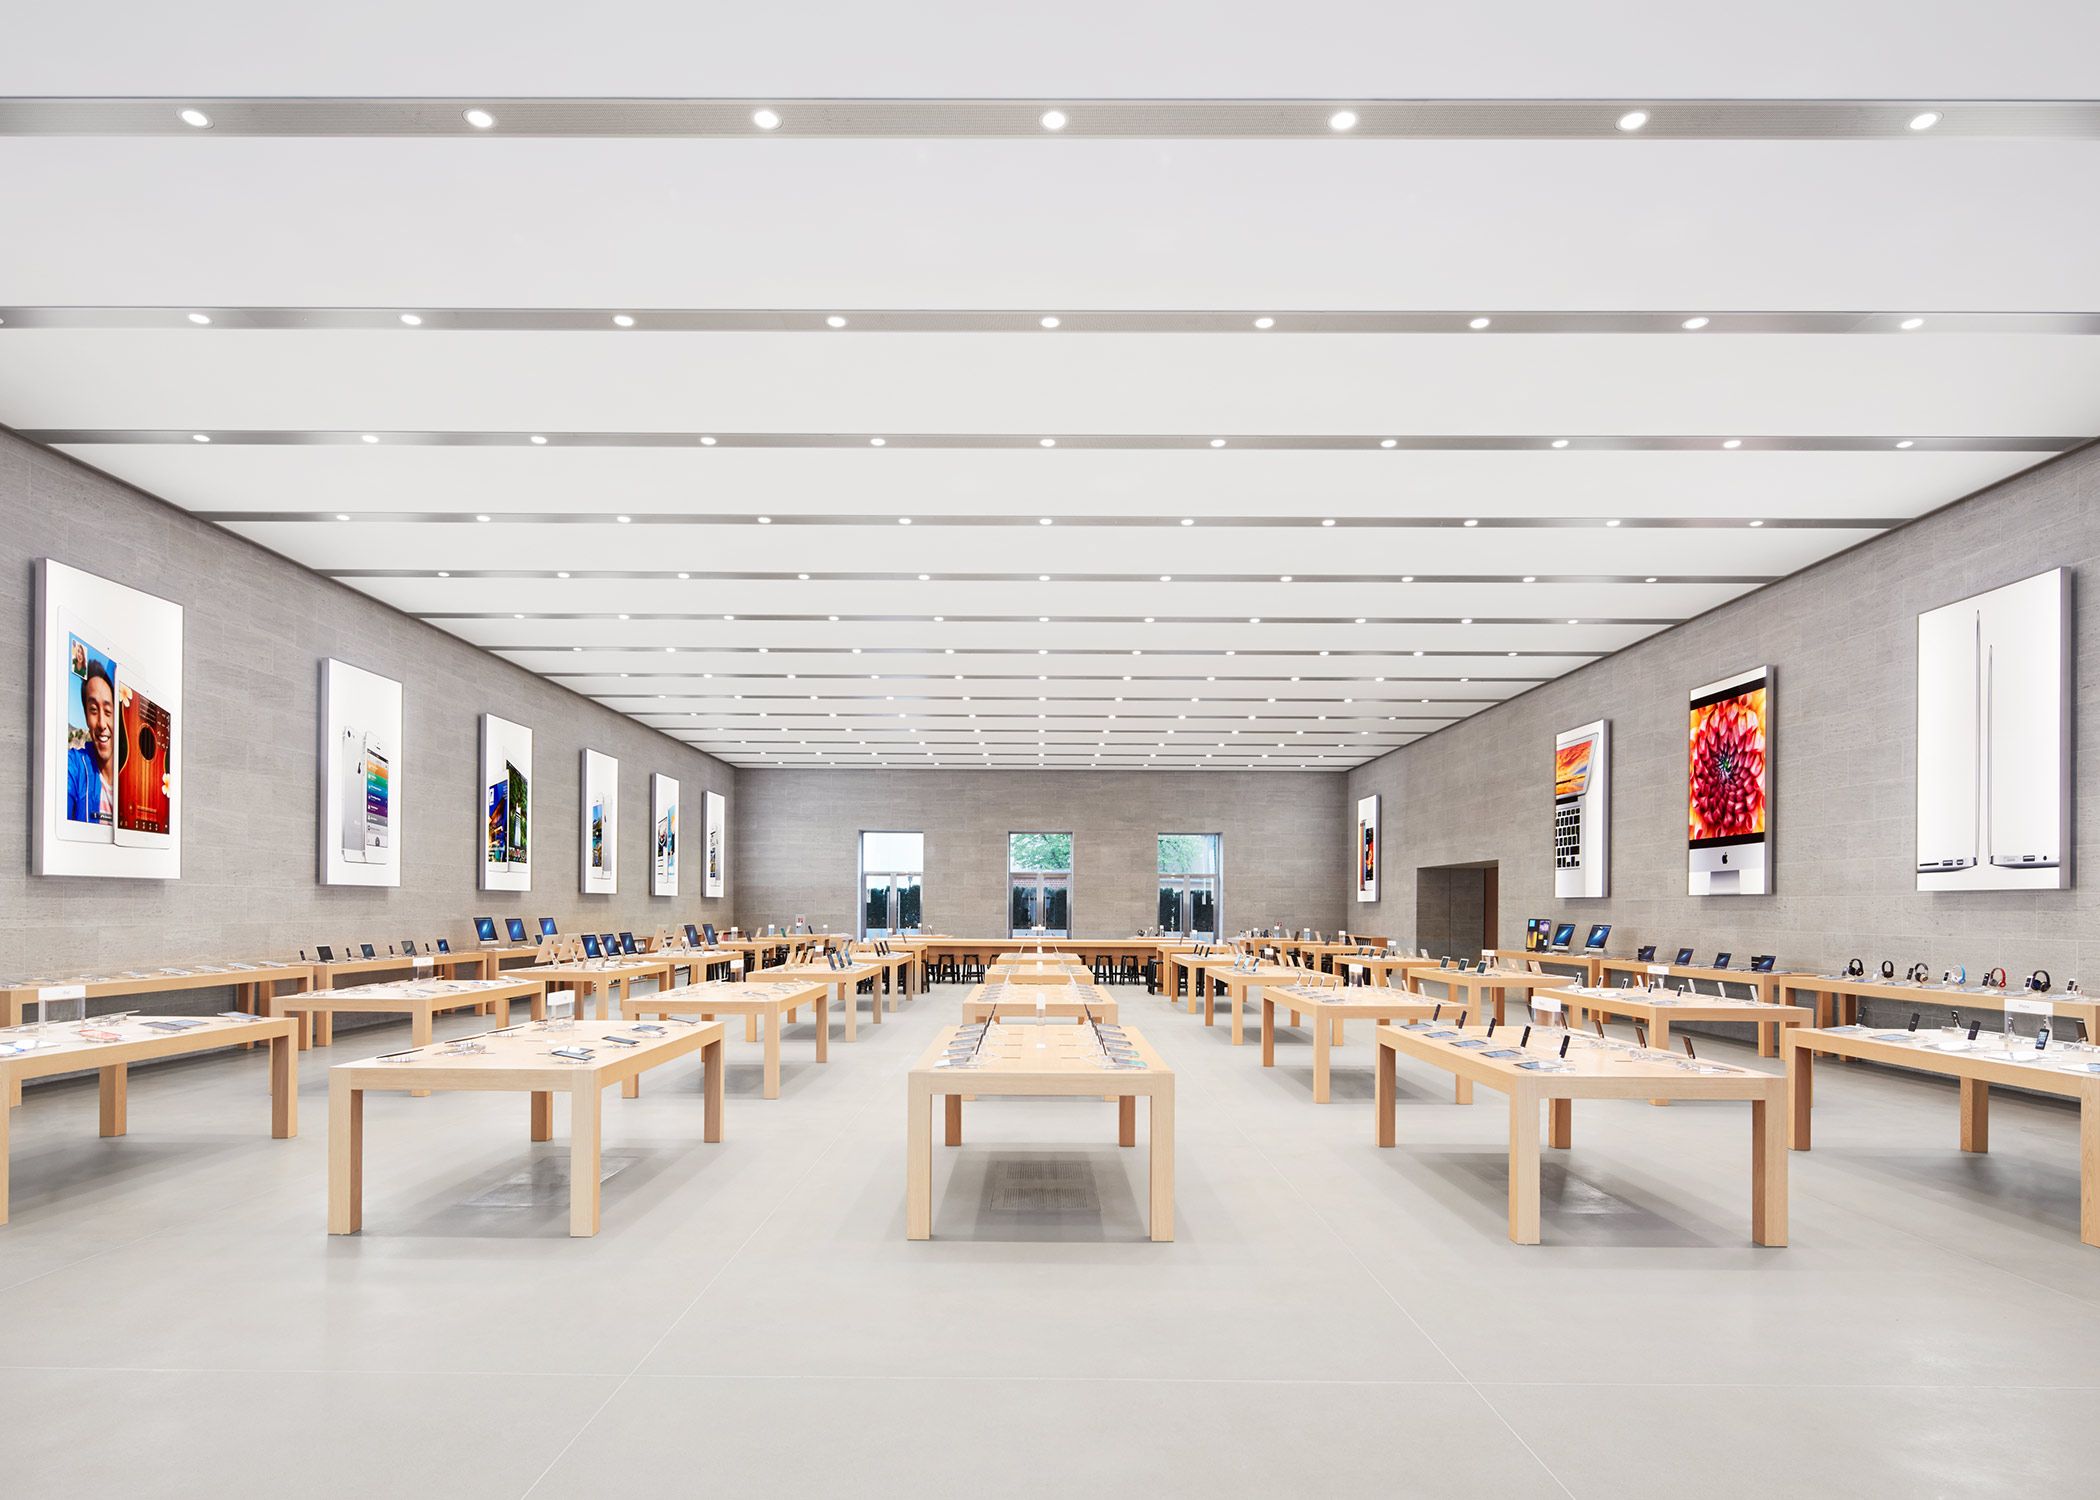 khung_canh_thuong_thay_cua_Apple_Store.jpg